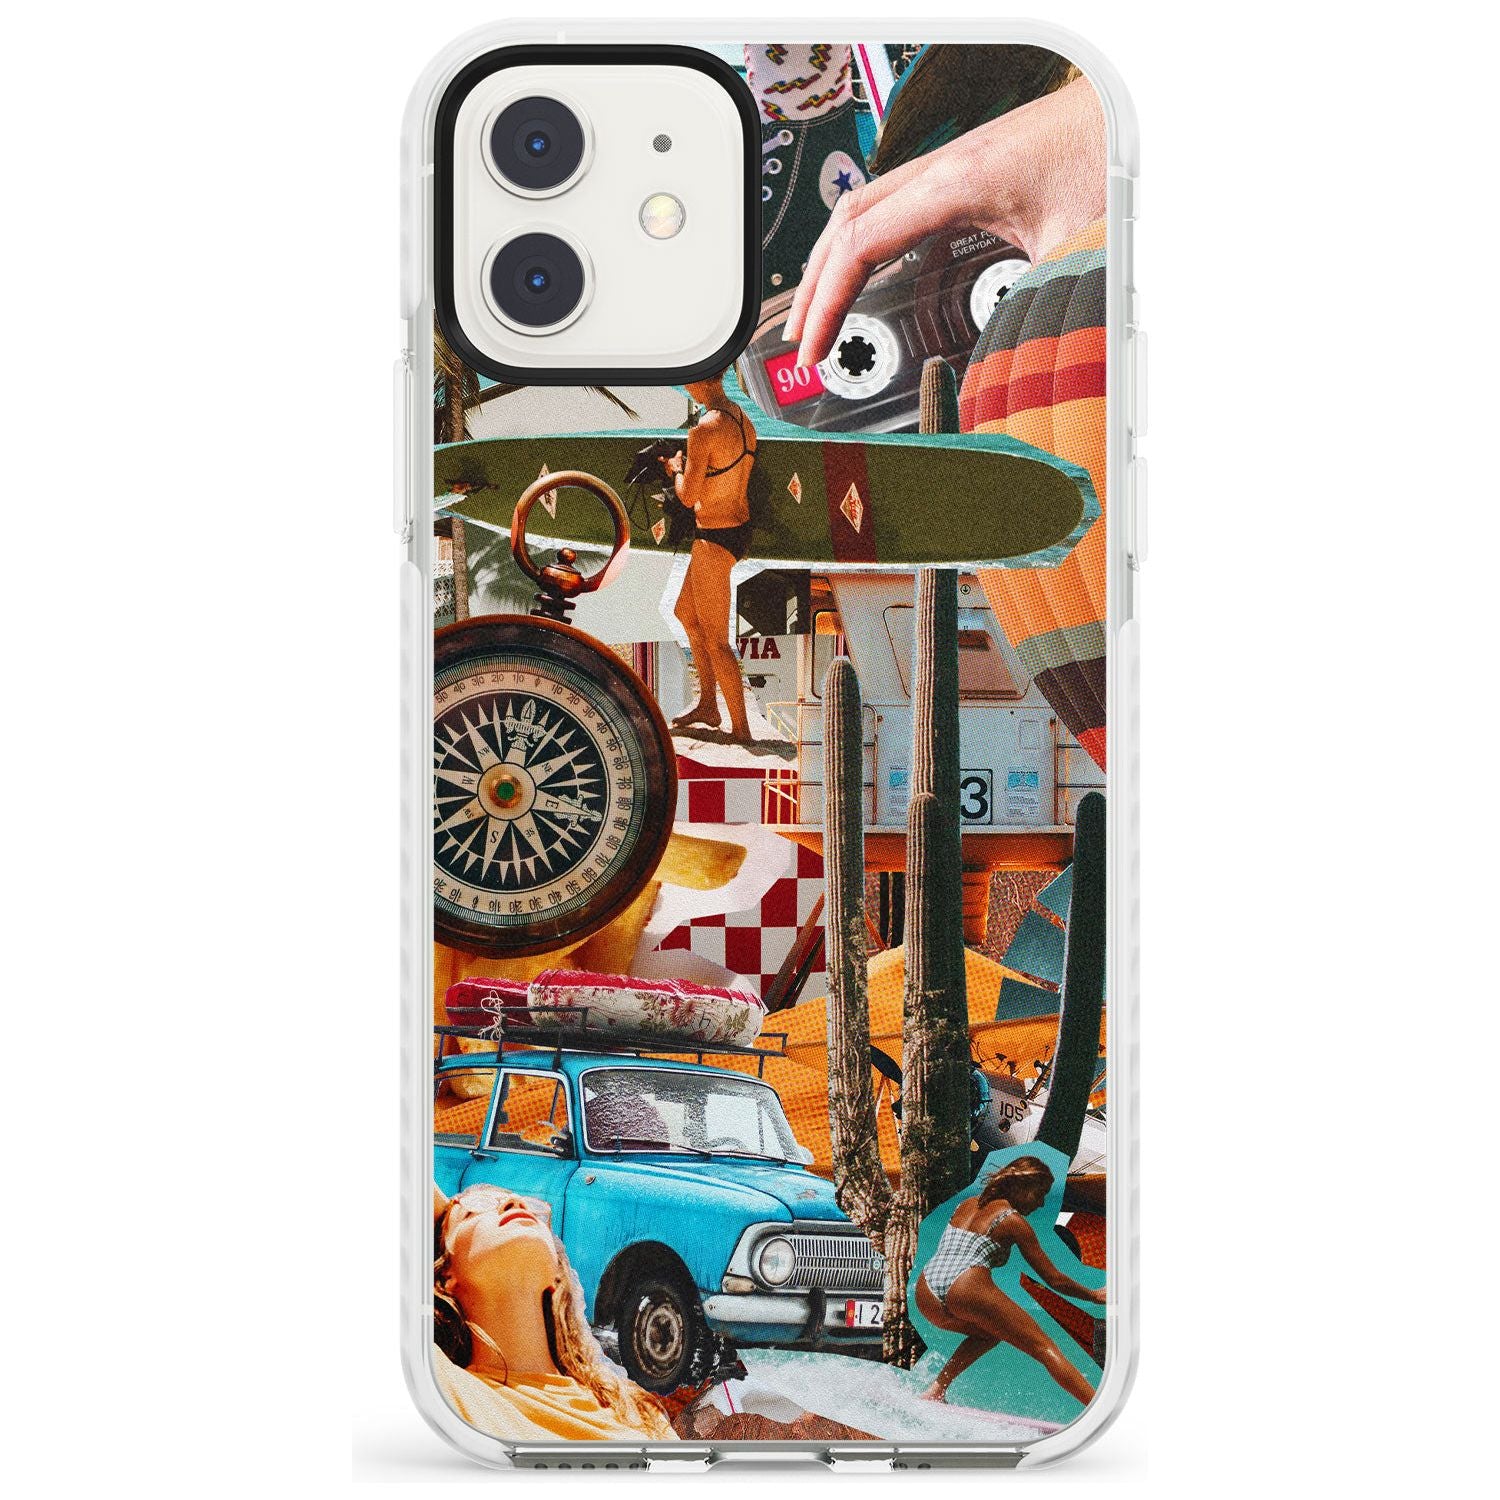 Vintage Collage: Road Trip Impact Phone Case for iPhone 11